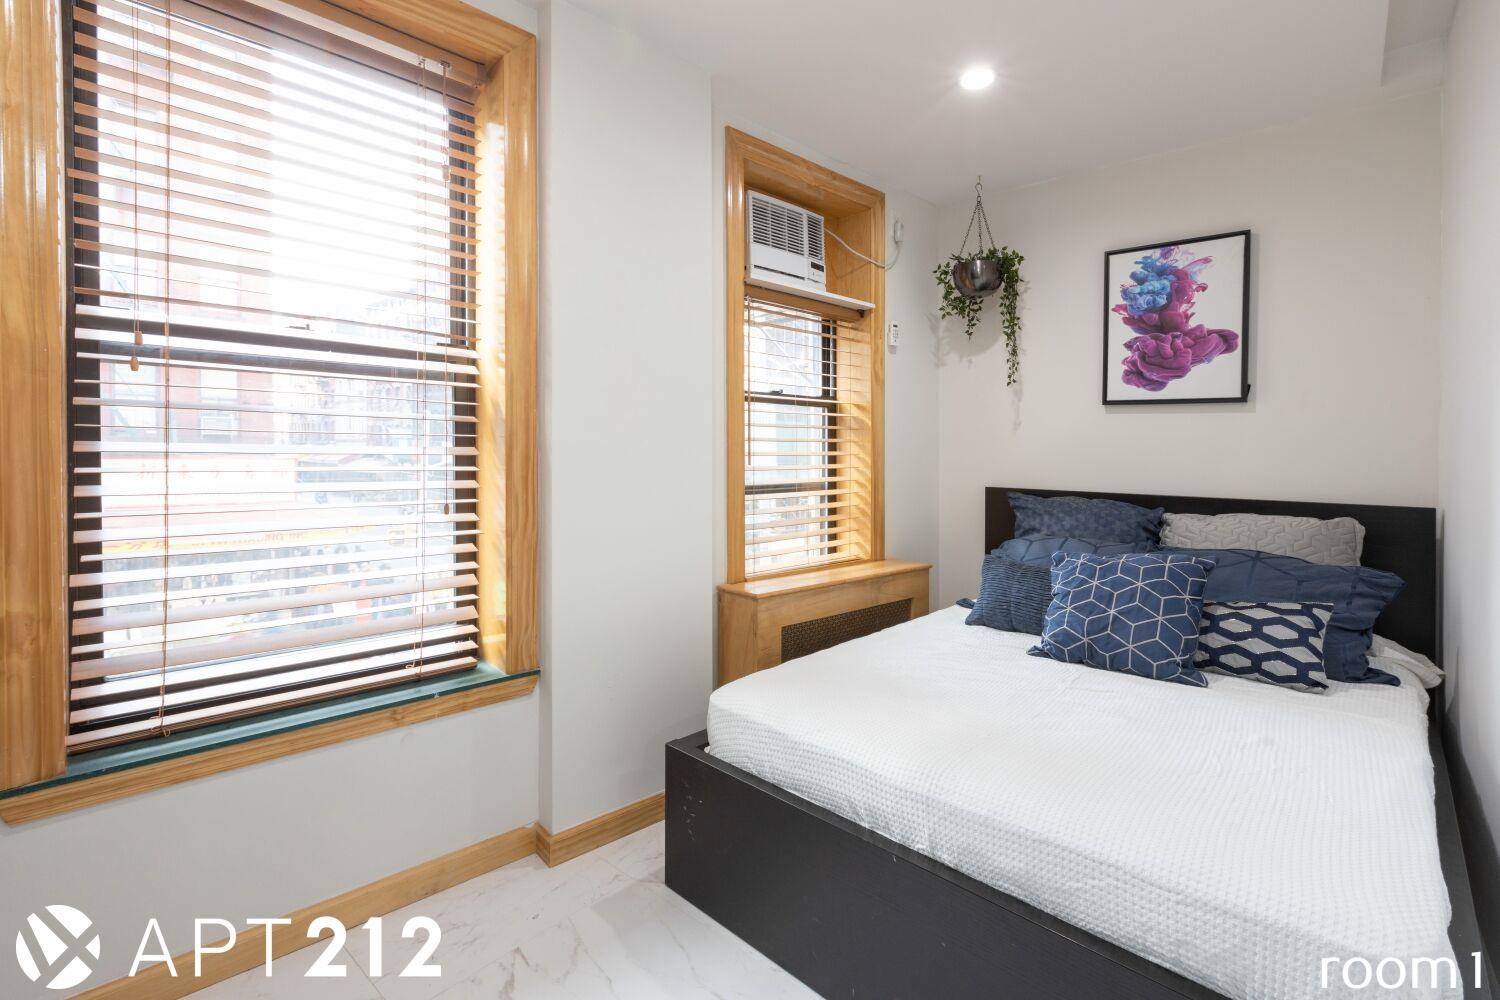 Fully renovated amazing 3 bedroomsLocated in the heart of Nolita Separate kitchen with stainless steel appliances Hardwood Oak Flooring Amazing design Cleaning services availableLive in a peaceful, quiet building with ...